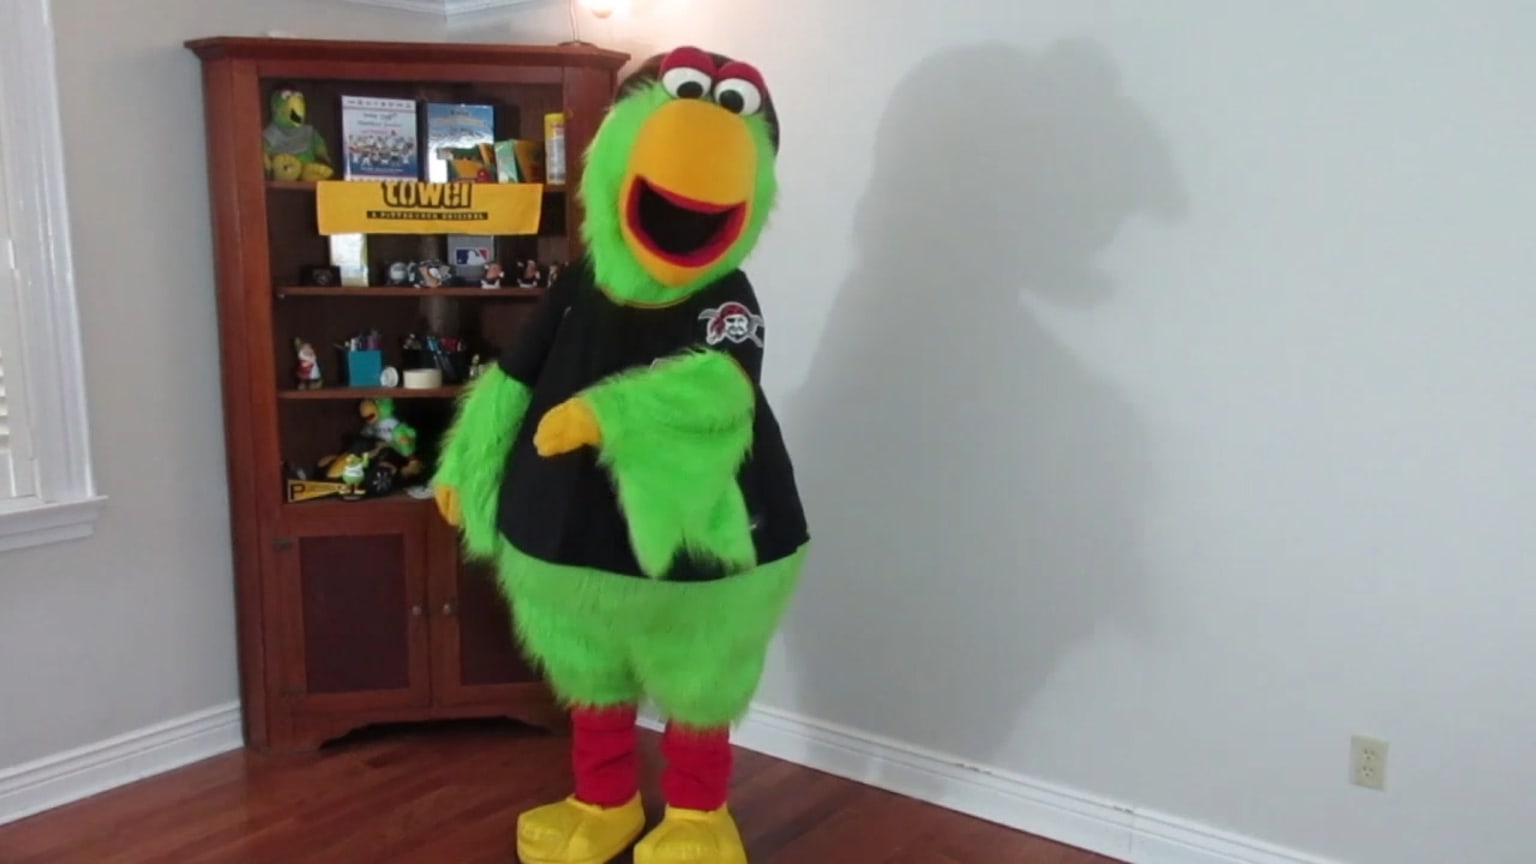 Pirate Parrot - PIttsburgh Pirates 